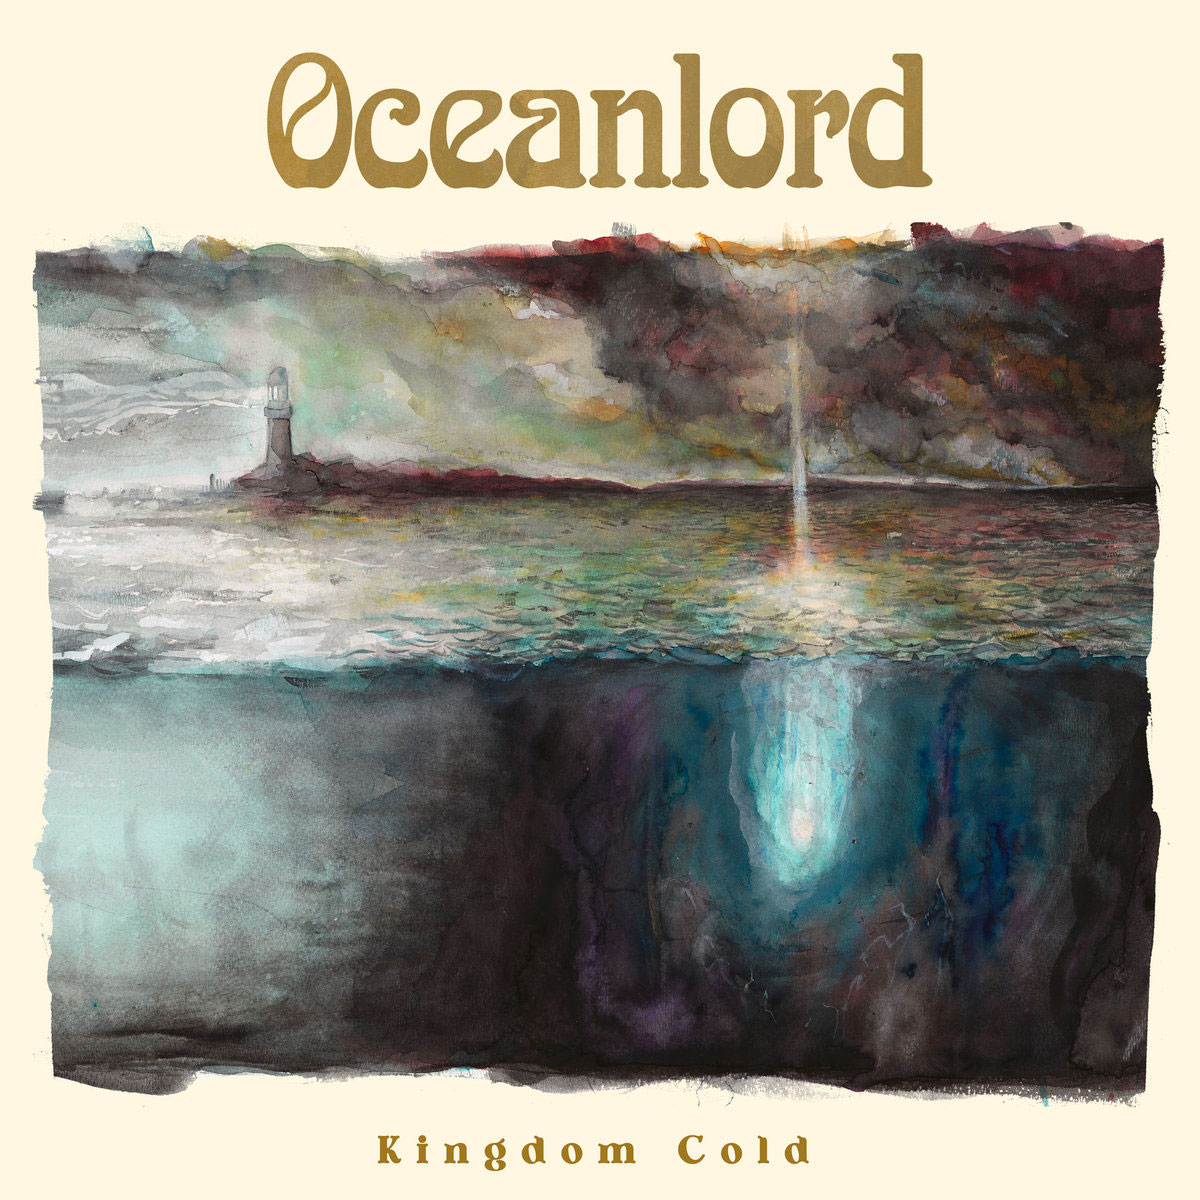 Kingdom Cold by Oceanlord